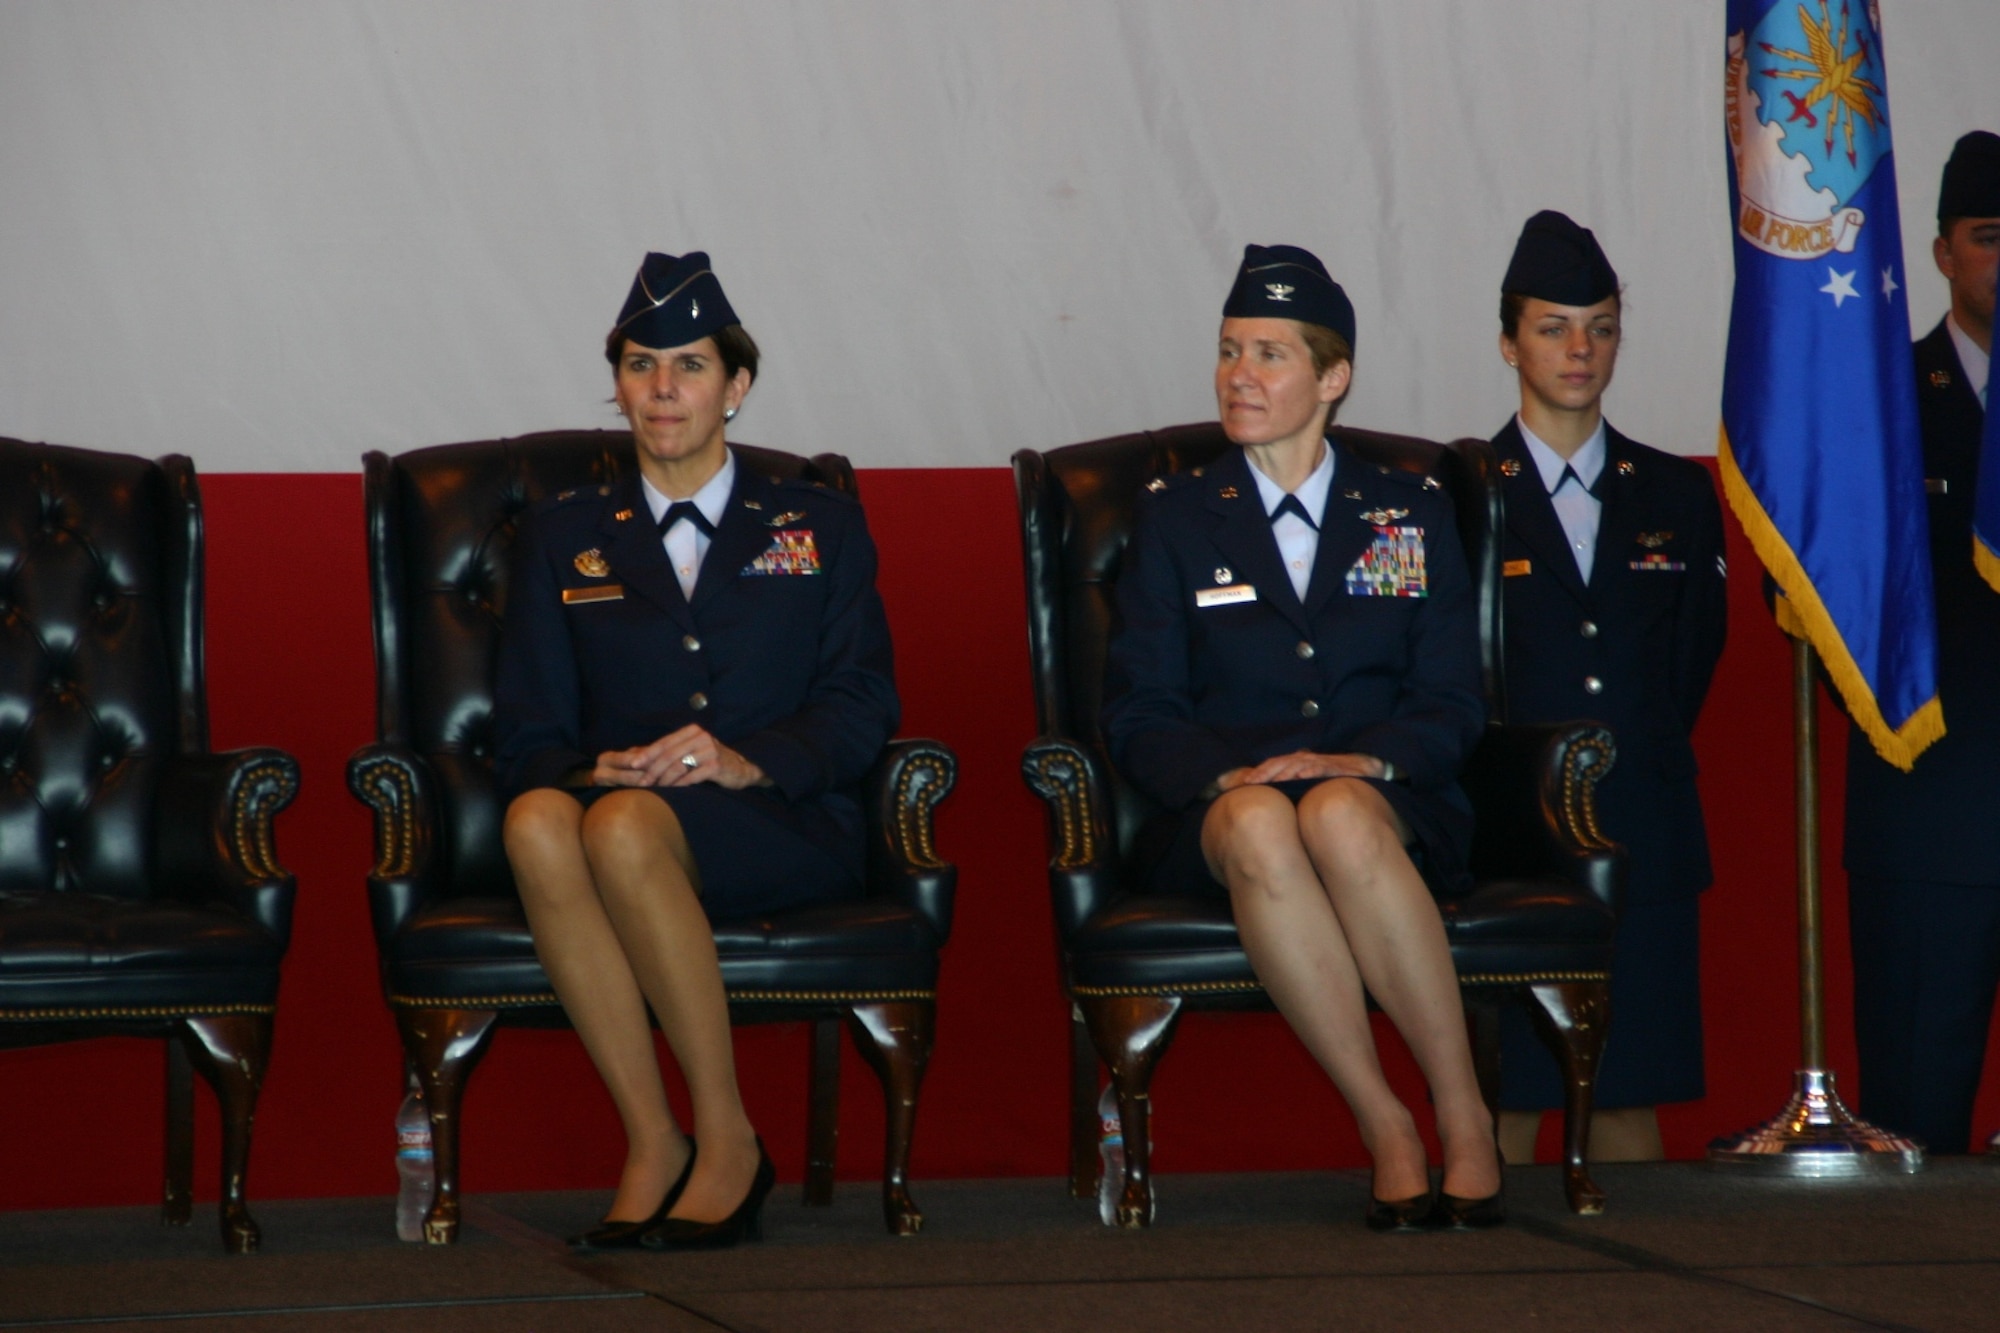 The outgoing and incoming commanders of the 552nd Air Control Wing sit side by side during the change of command ceremony. Photo Courtesy of 2nd Lt. Kinder Blacke.